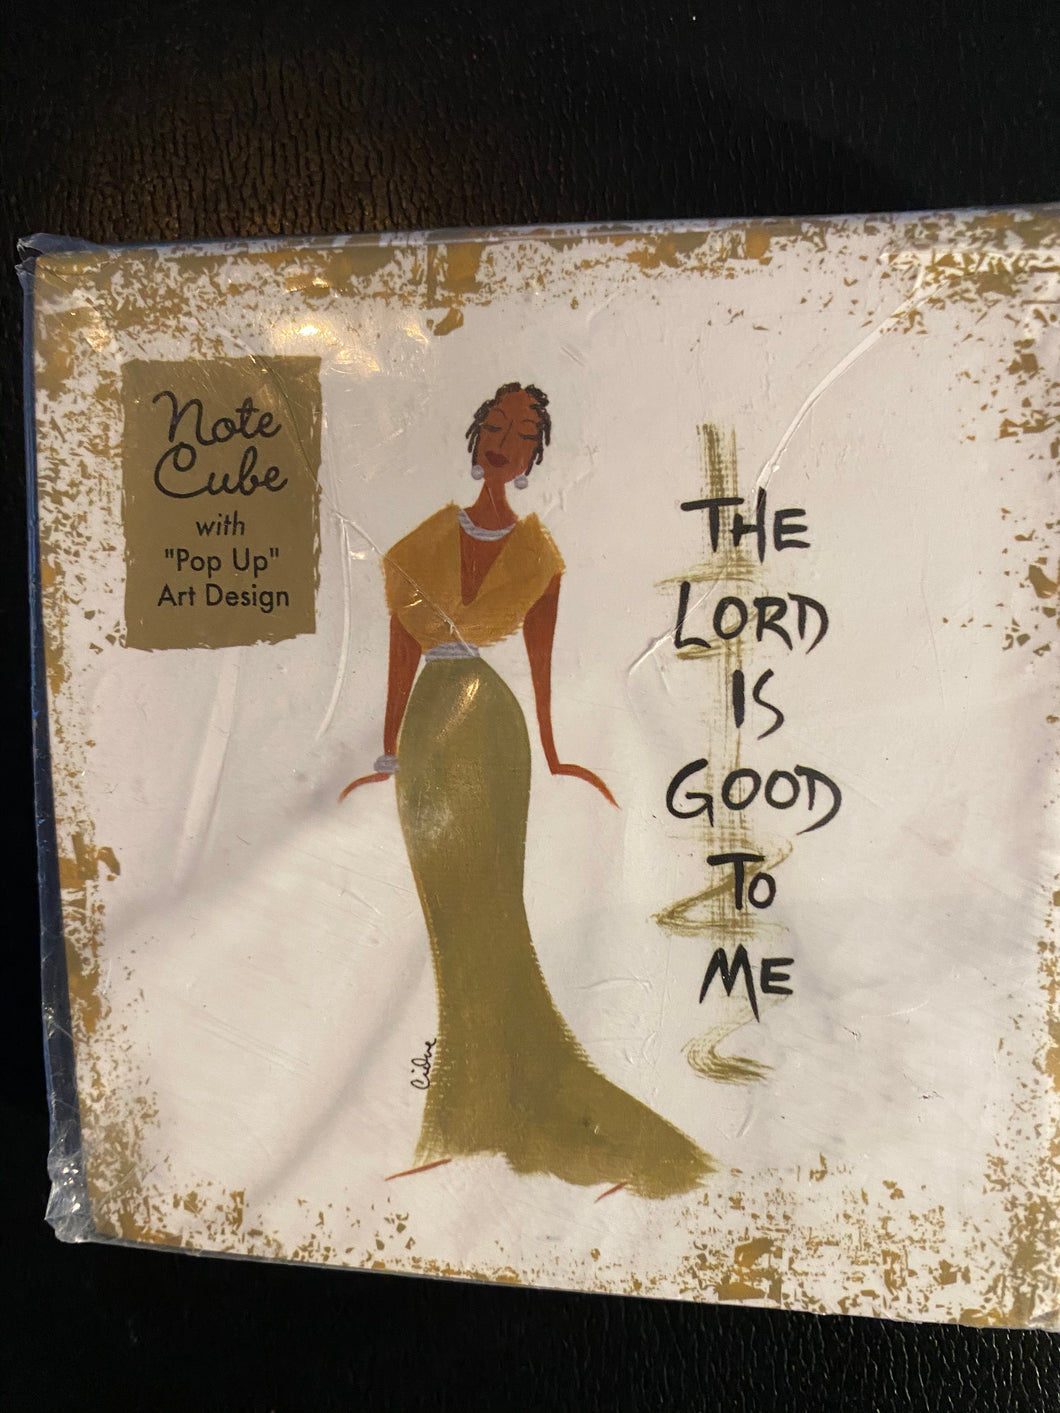 NEW!!! The Lord Is Good To Me Note Cube